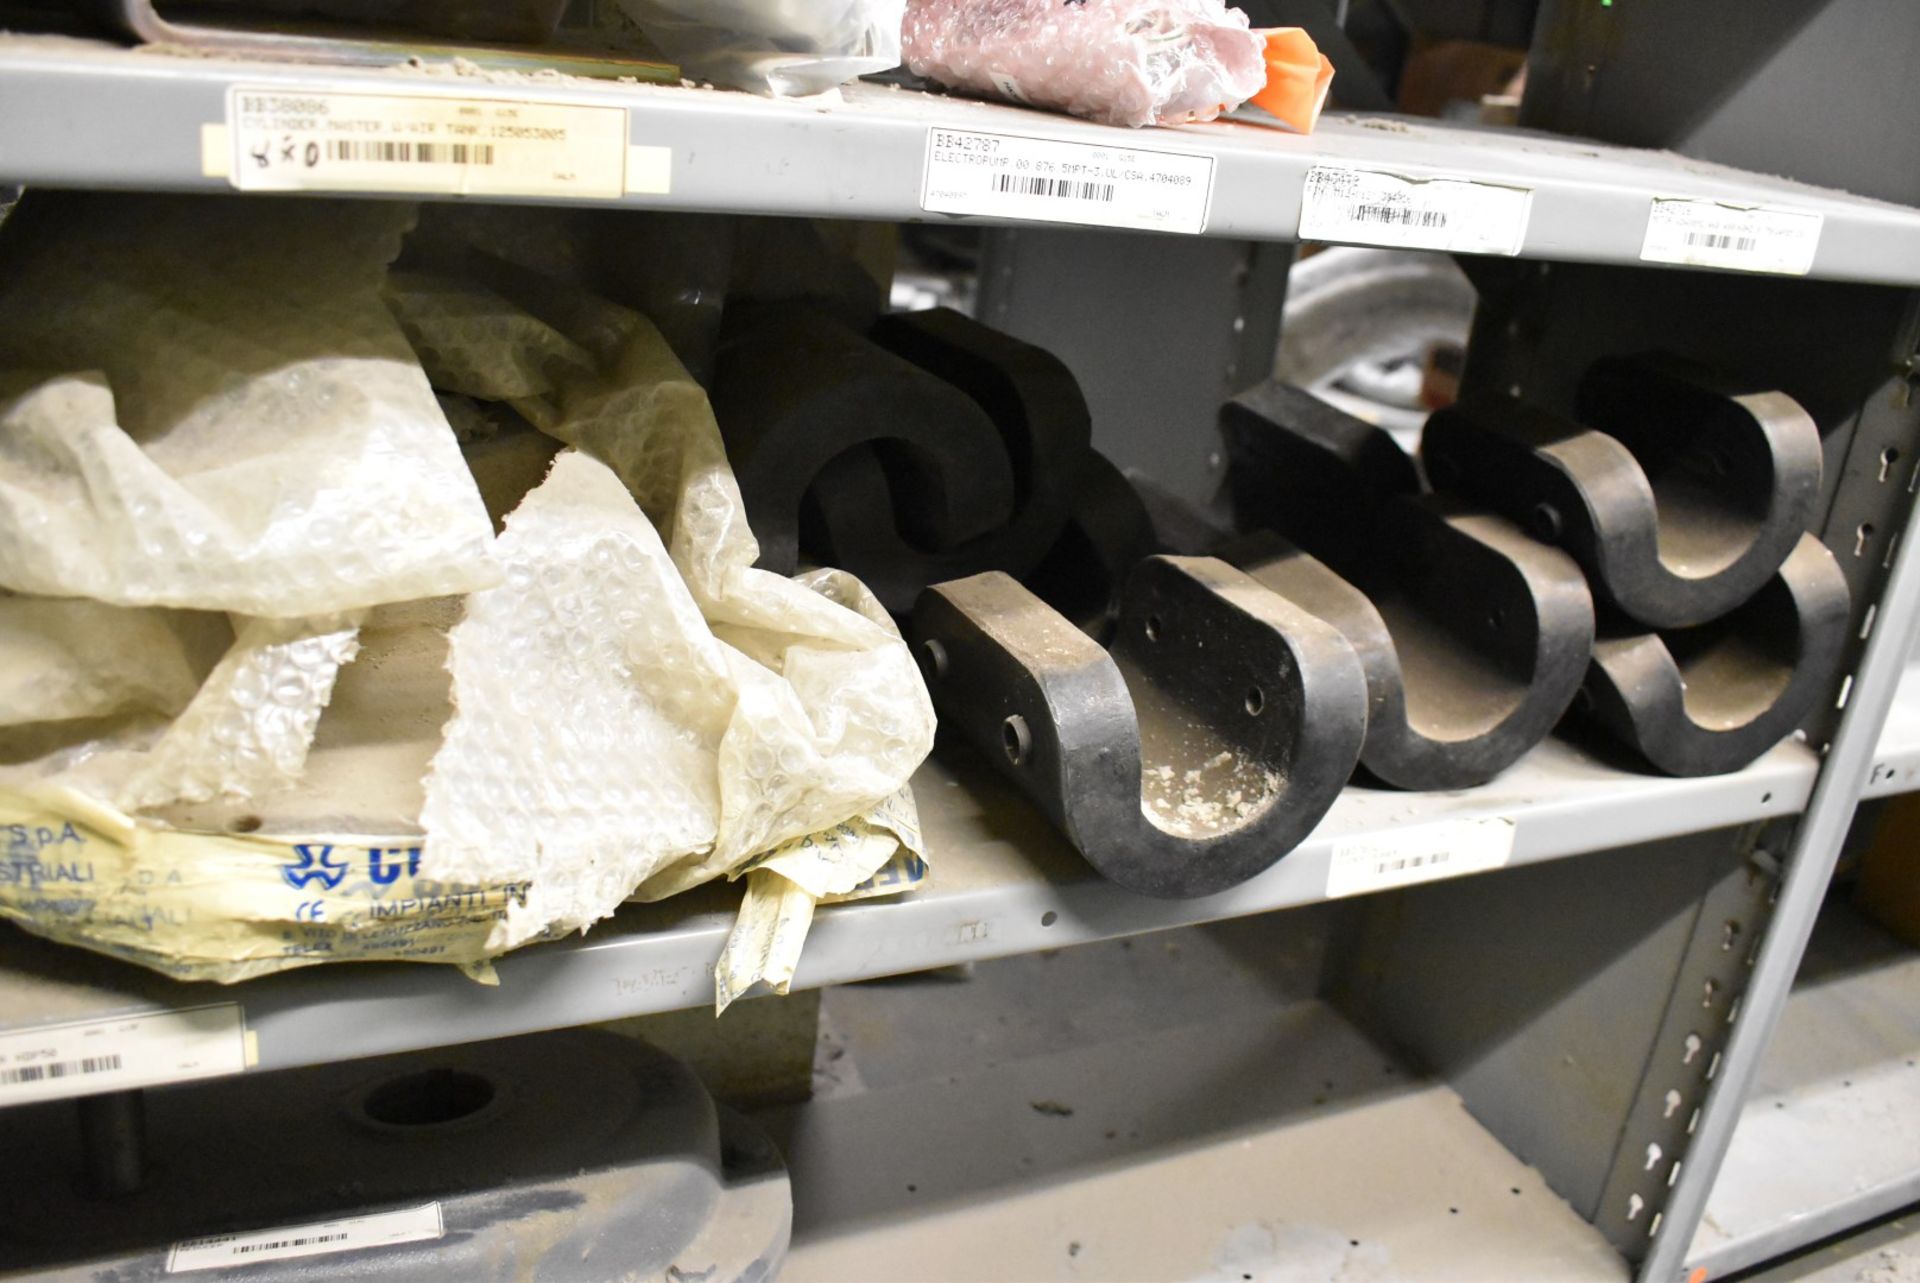 LOT/ CONTENTS OF SHELF - INCLUDING AIR TANK MASTER CYLINDERS, RUBBER ELEMENTS, REDUCER [RIGGING FEES - Image 3 of 4